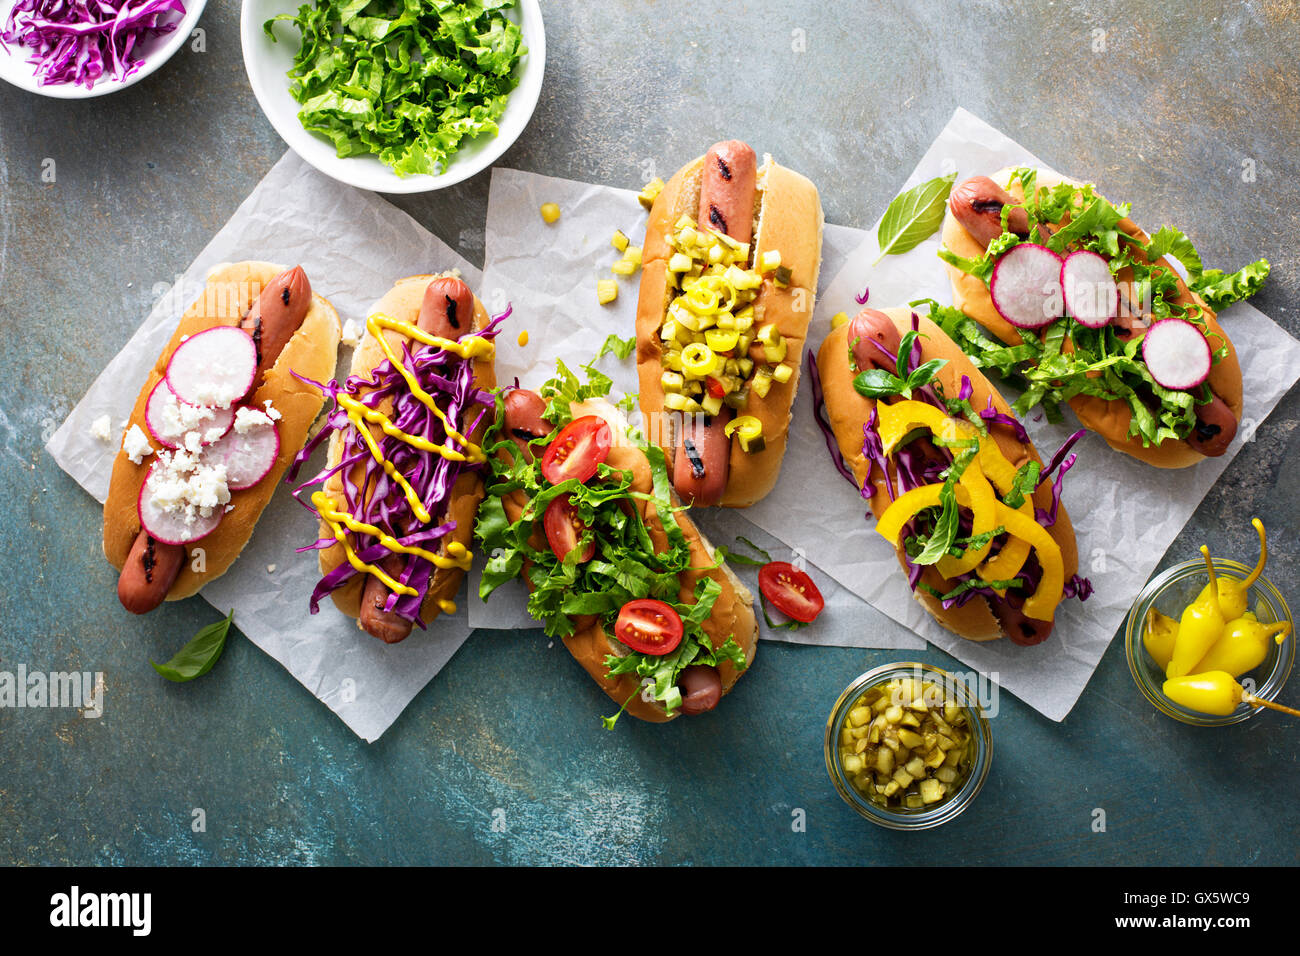 Variety of hot dogs with healthy garnishes Stock Photo